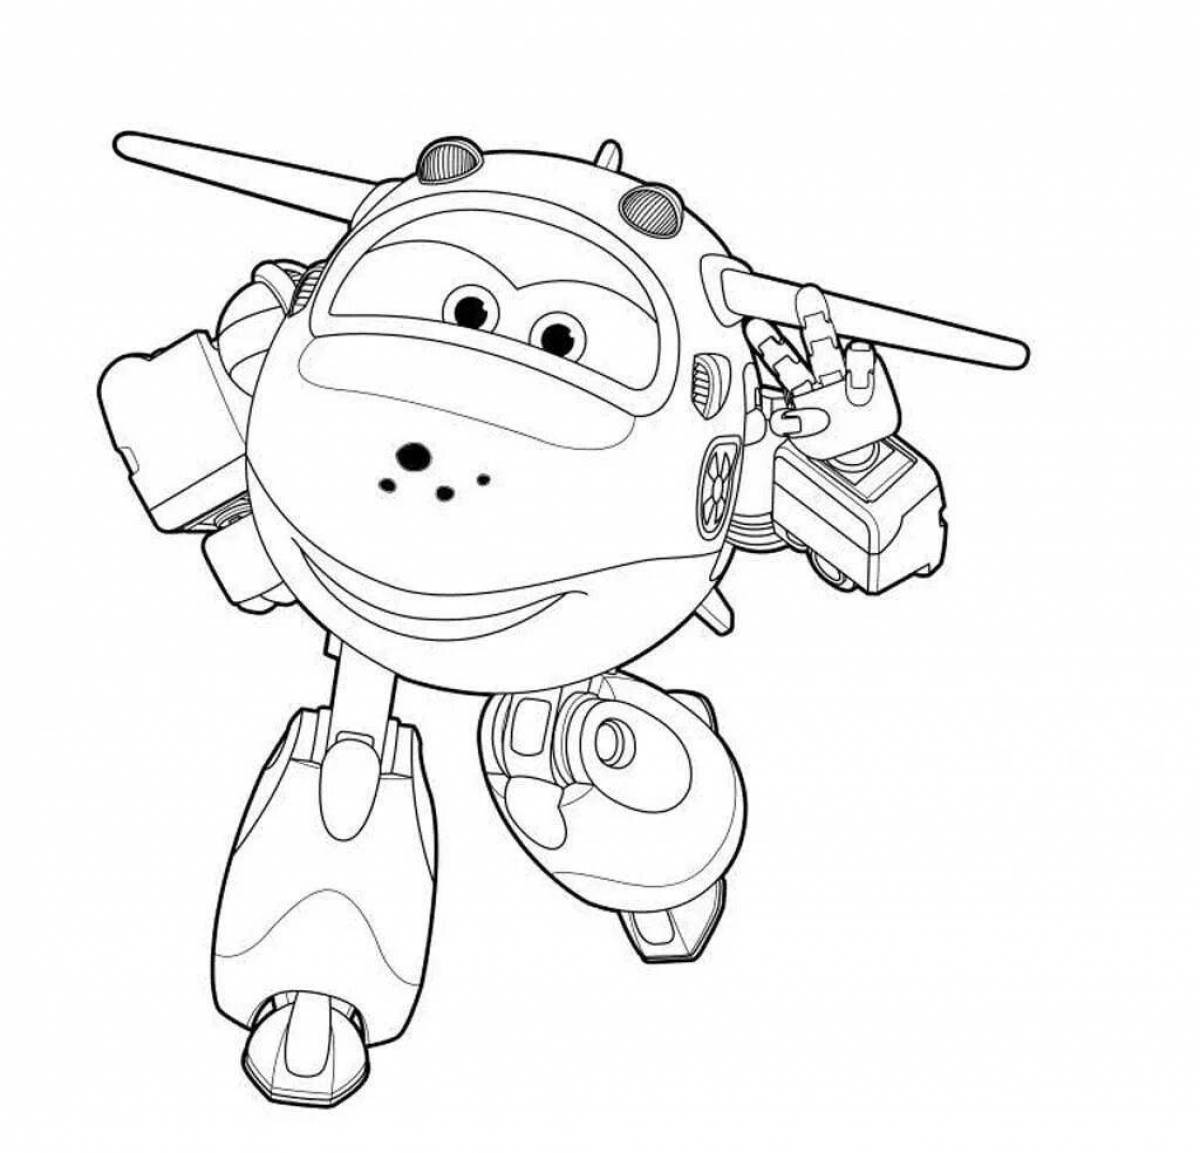 Jerome super wings playful coloring